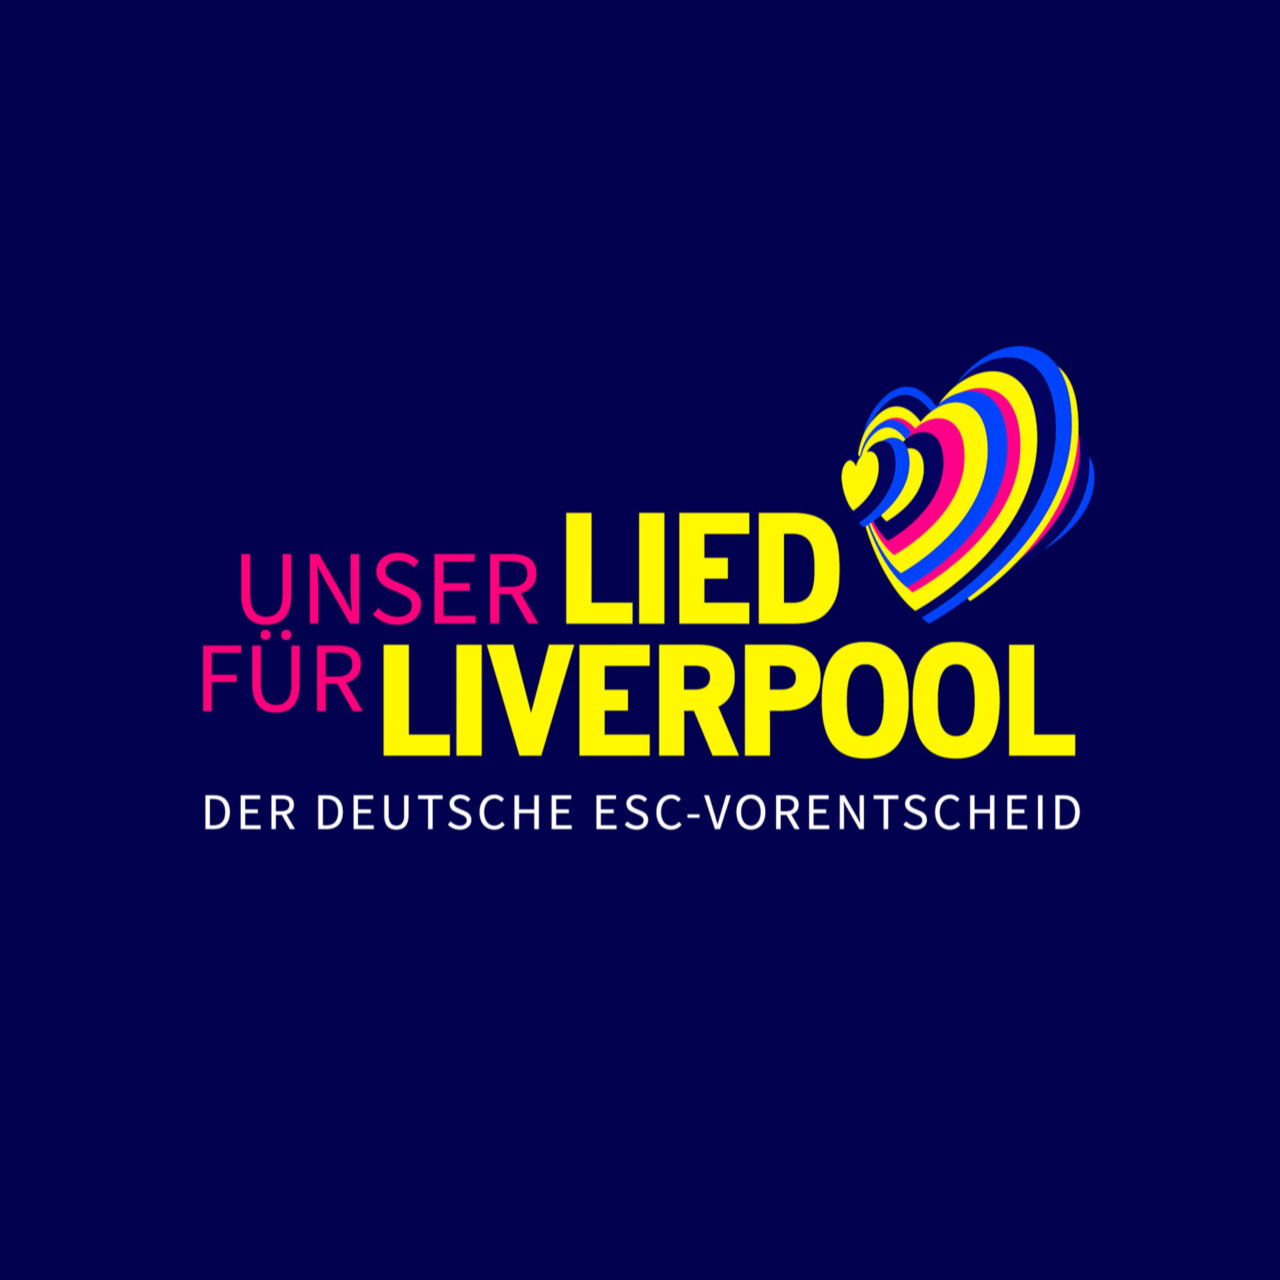 Germany 🇩🇪 in the Eurovision Song Contest Unser Lied für Liverpool cover artwork